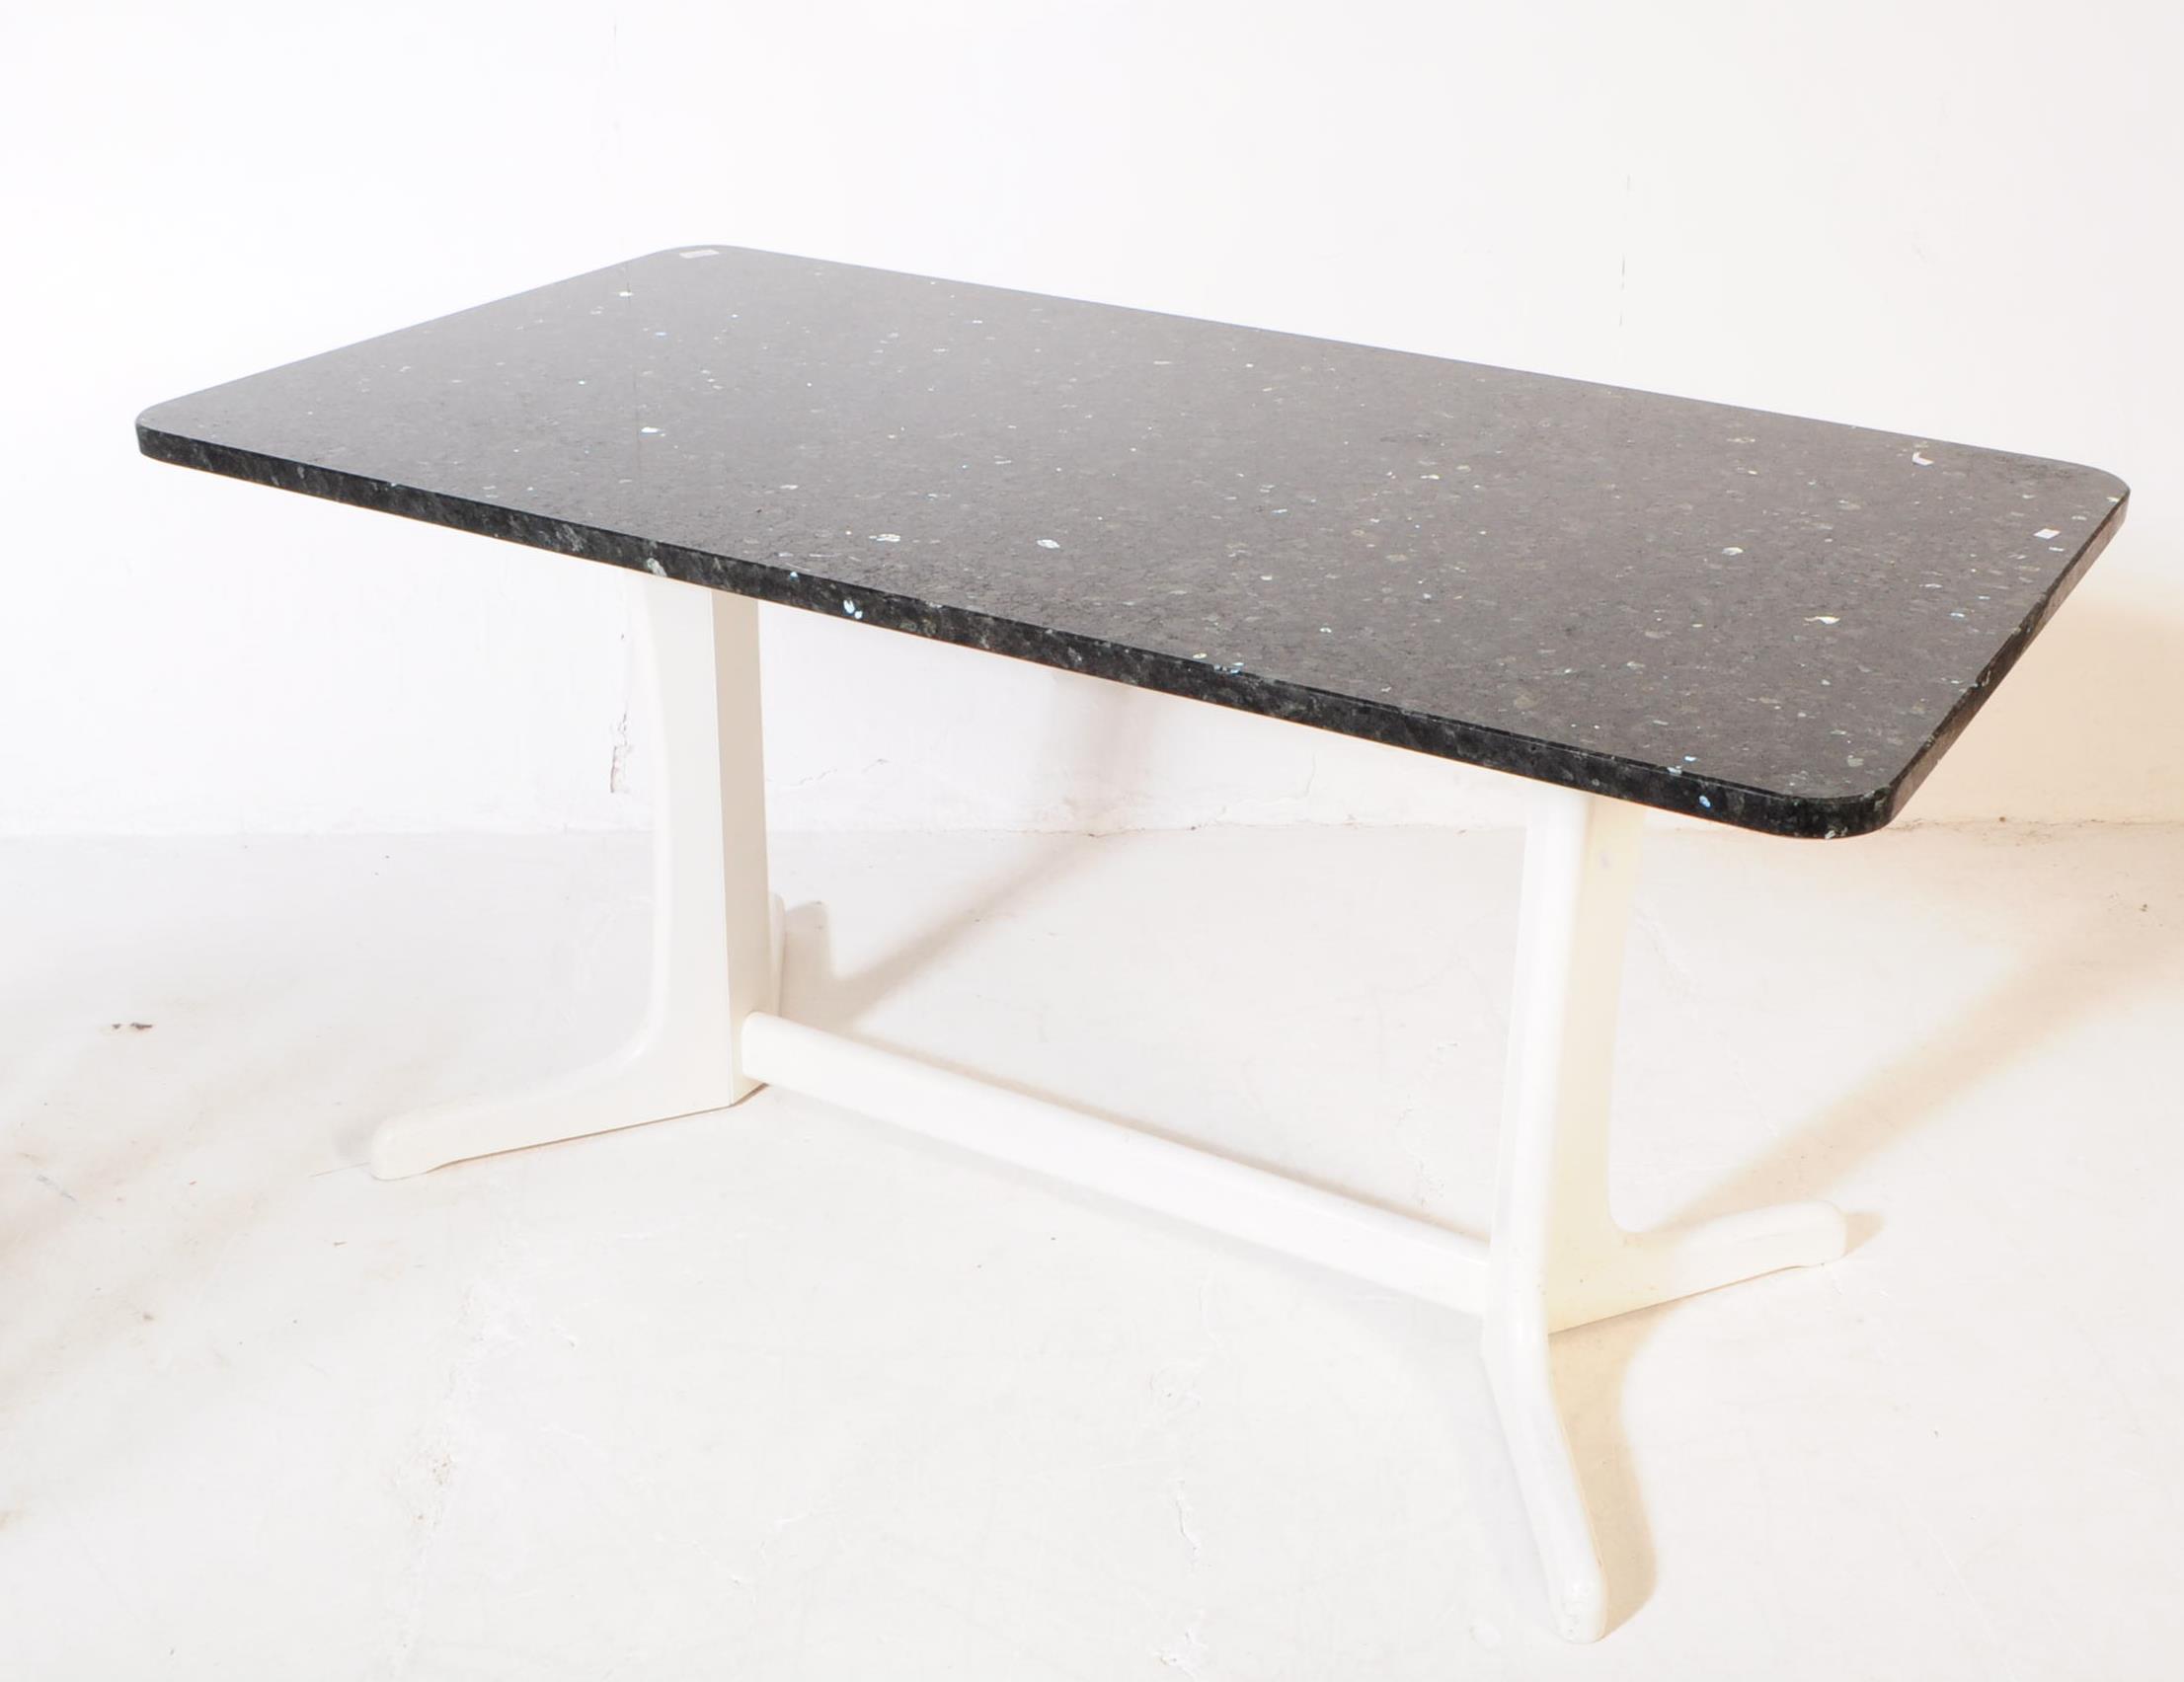 BRITISH MODERN DESIGN - GRANITE TOP DINING TABLE W/ CHAIRS - Image 2 of 8